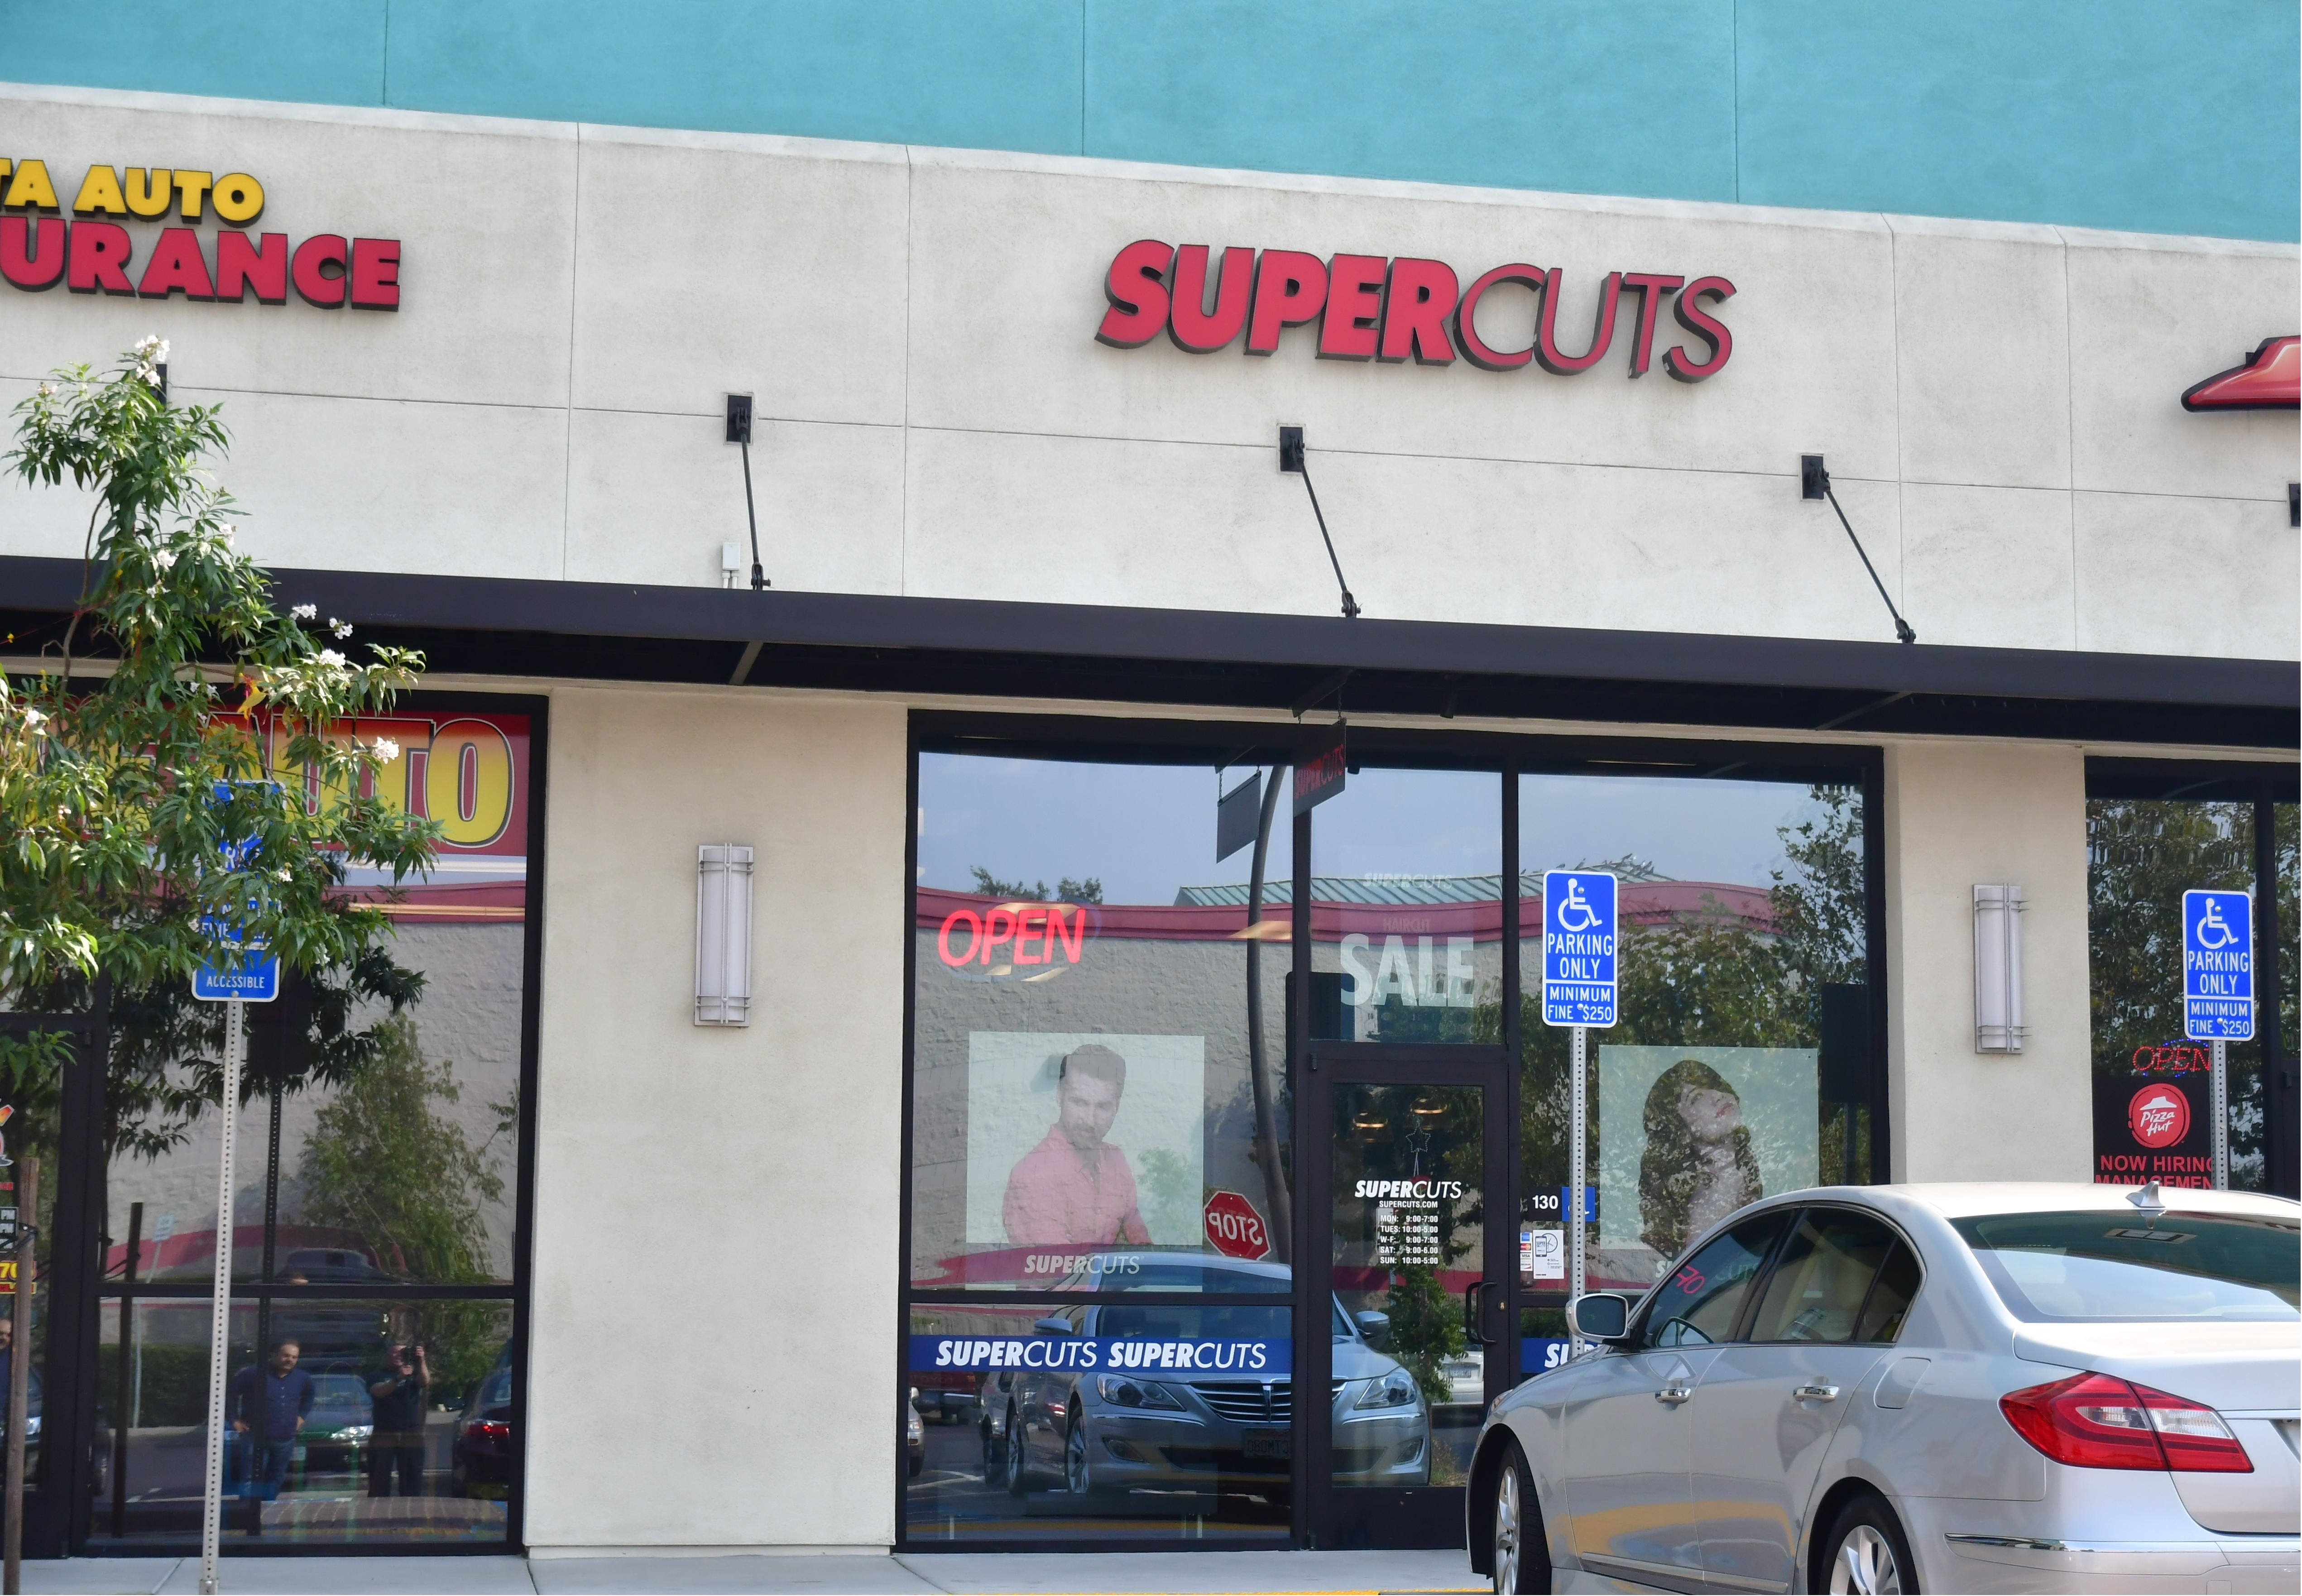 Supercuts Coupons near me in Pittsburg, CA 94565 | 8coupons